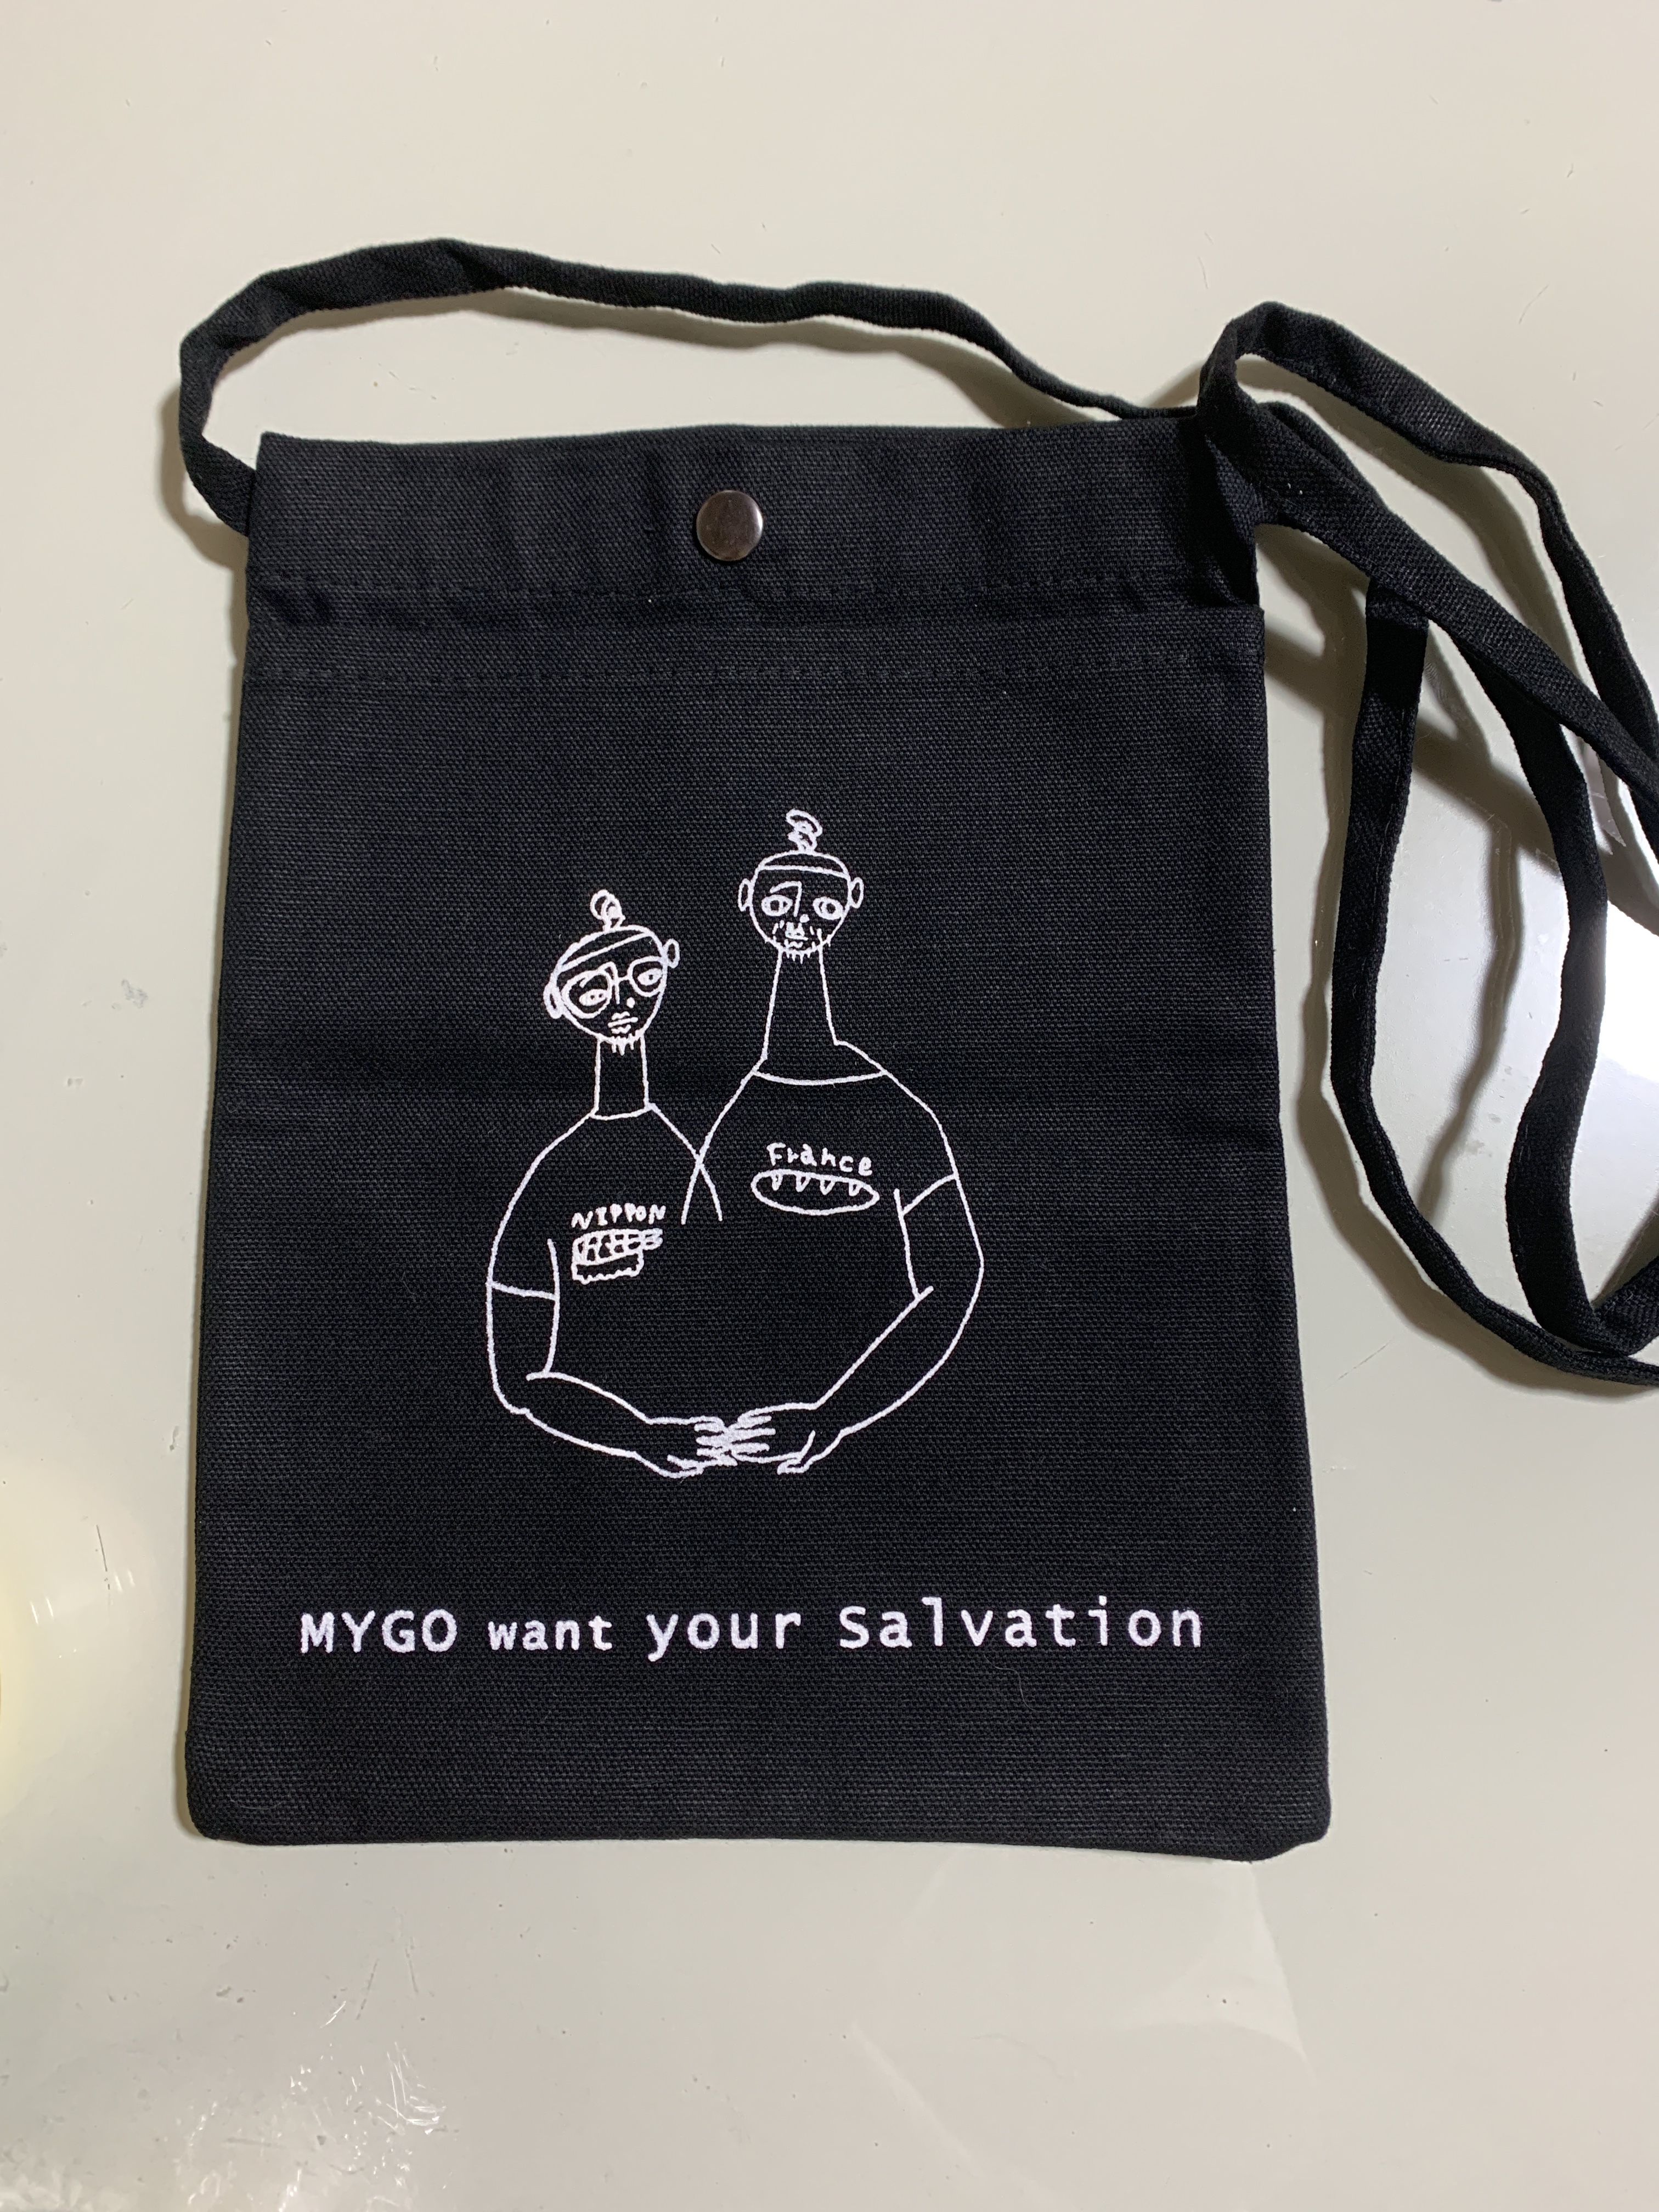 「MYGO want your Salvation」第二弾、出揃いました！